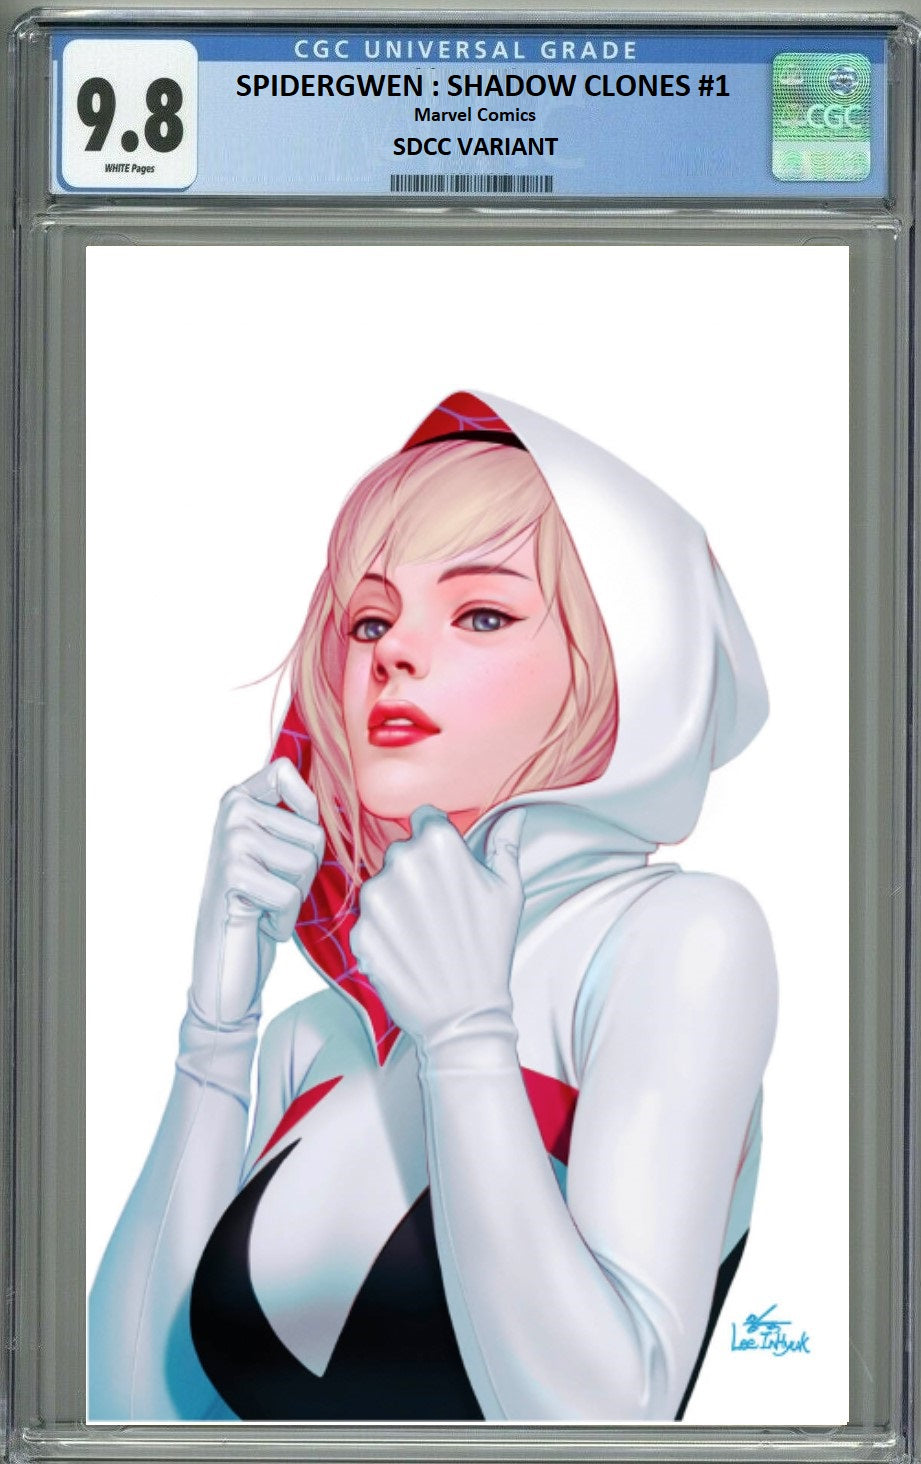 SDCC 2023 SPIDER-GWEN SHADOW CLONES #1 INHYUK LEE VARIANT LIMITED TO 1000 COPIES - RAW & GRADED OPTIONS